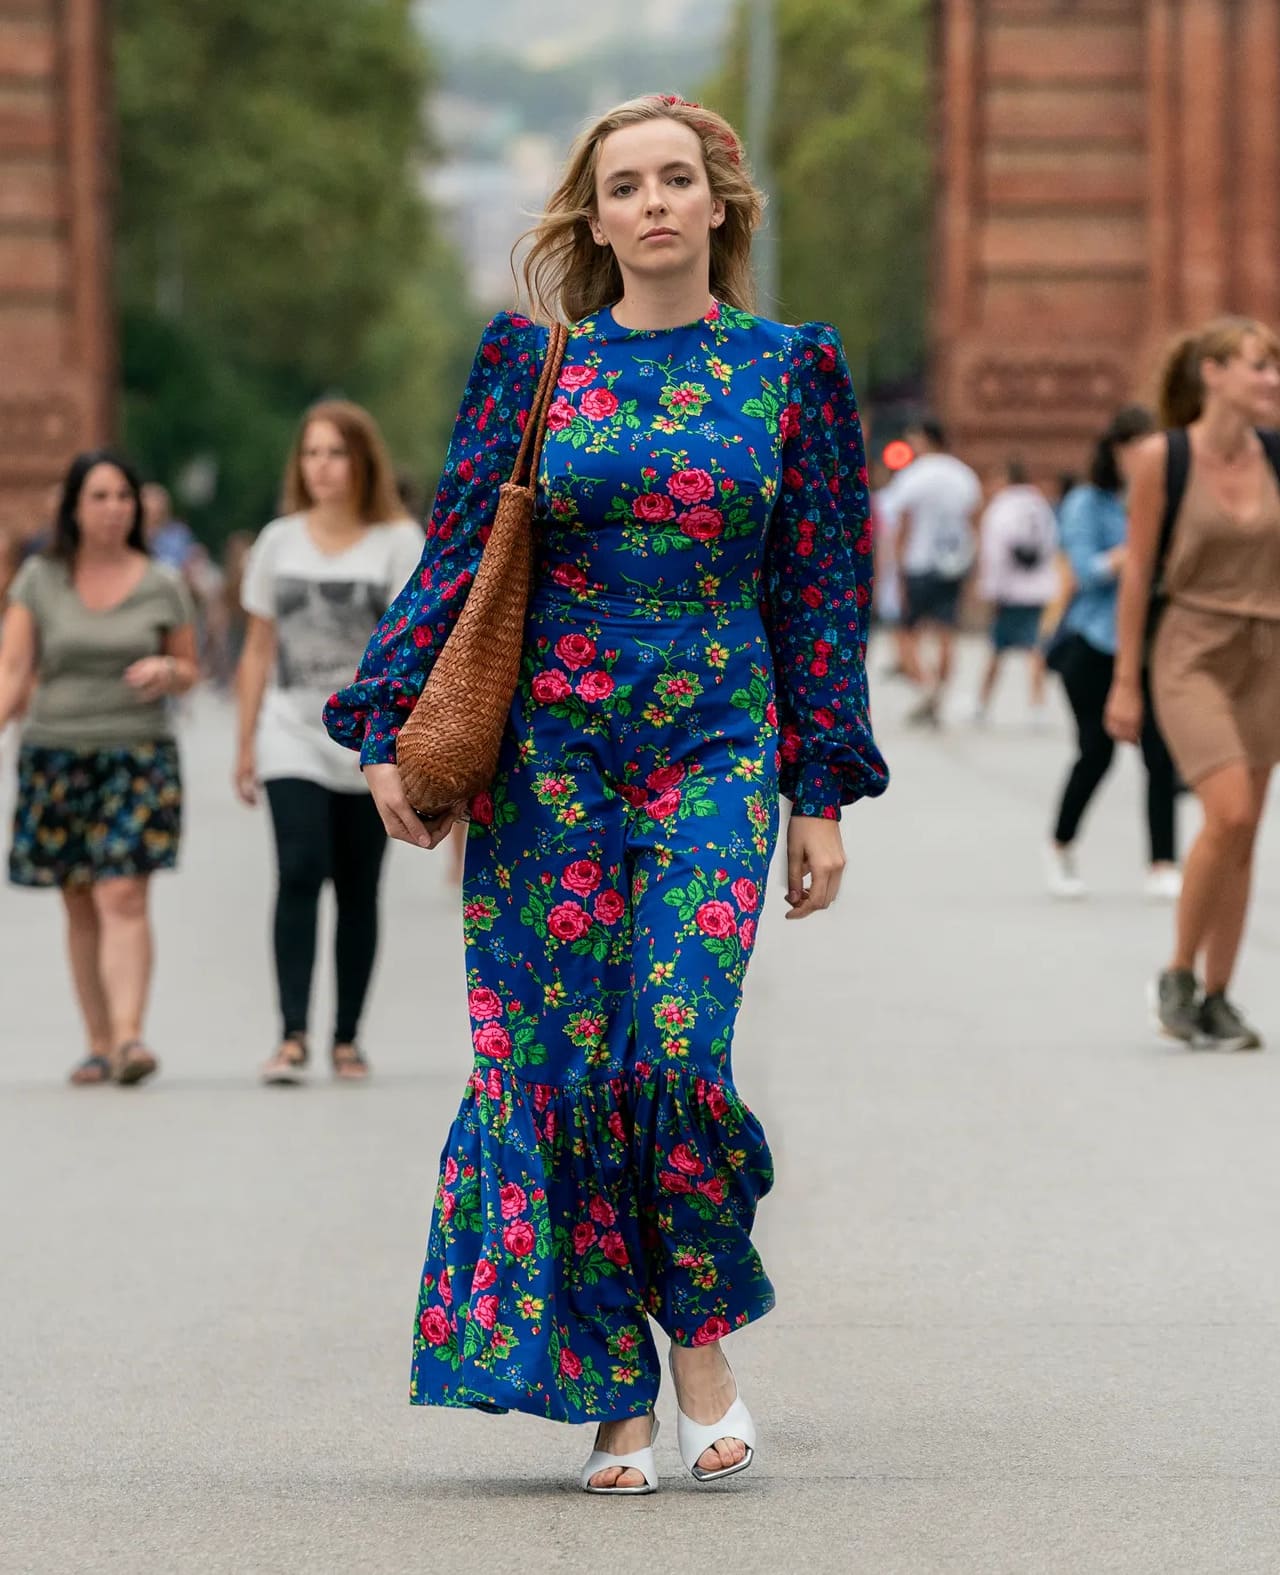 Floral Delighted Jodie Comer In Adorning Floral Print Blue Colored Dress